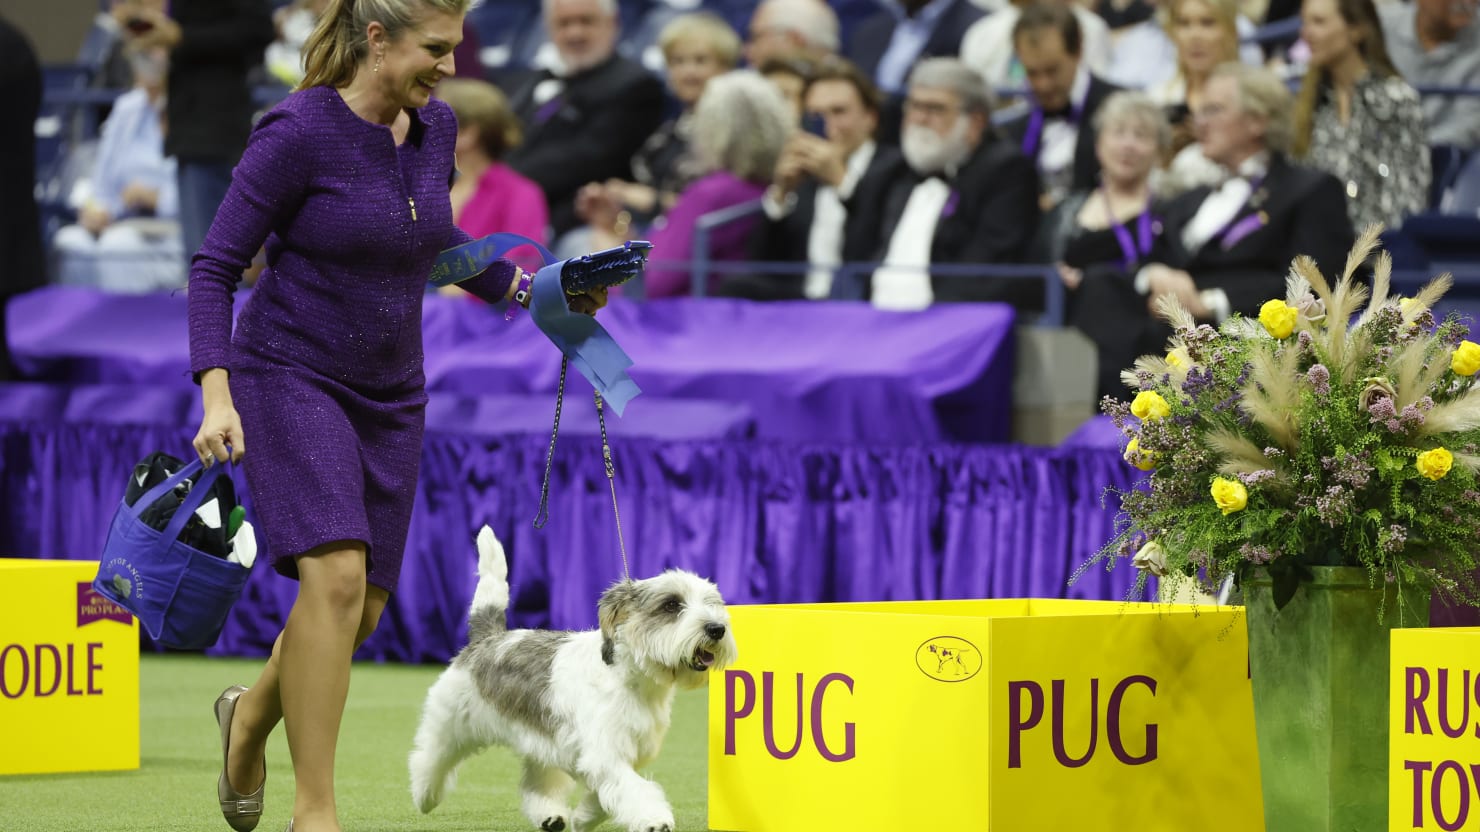 Petit Basset Griffon Vendéen Named Buddy Holly Wins Best in Show at Westminster Kennel Club